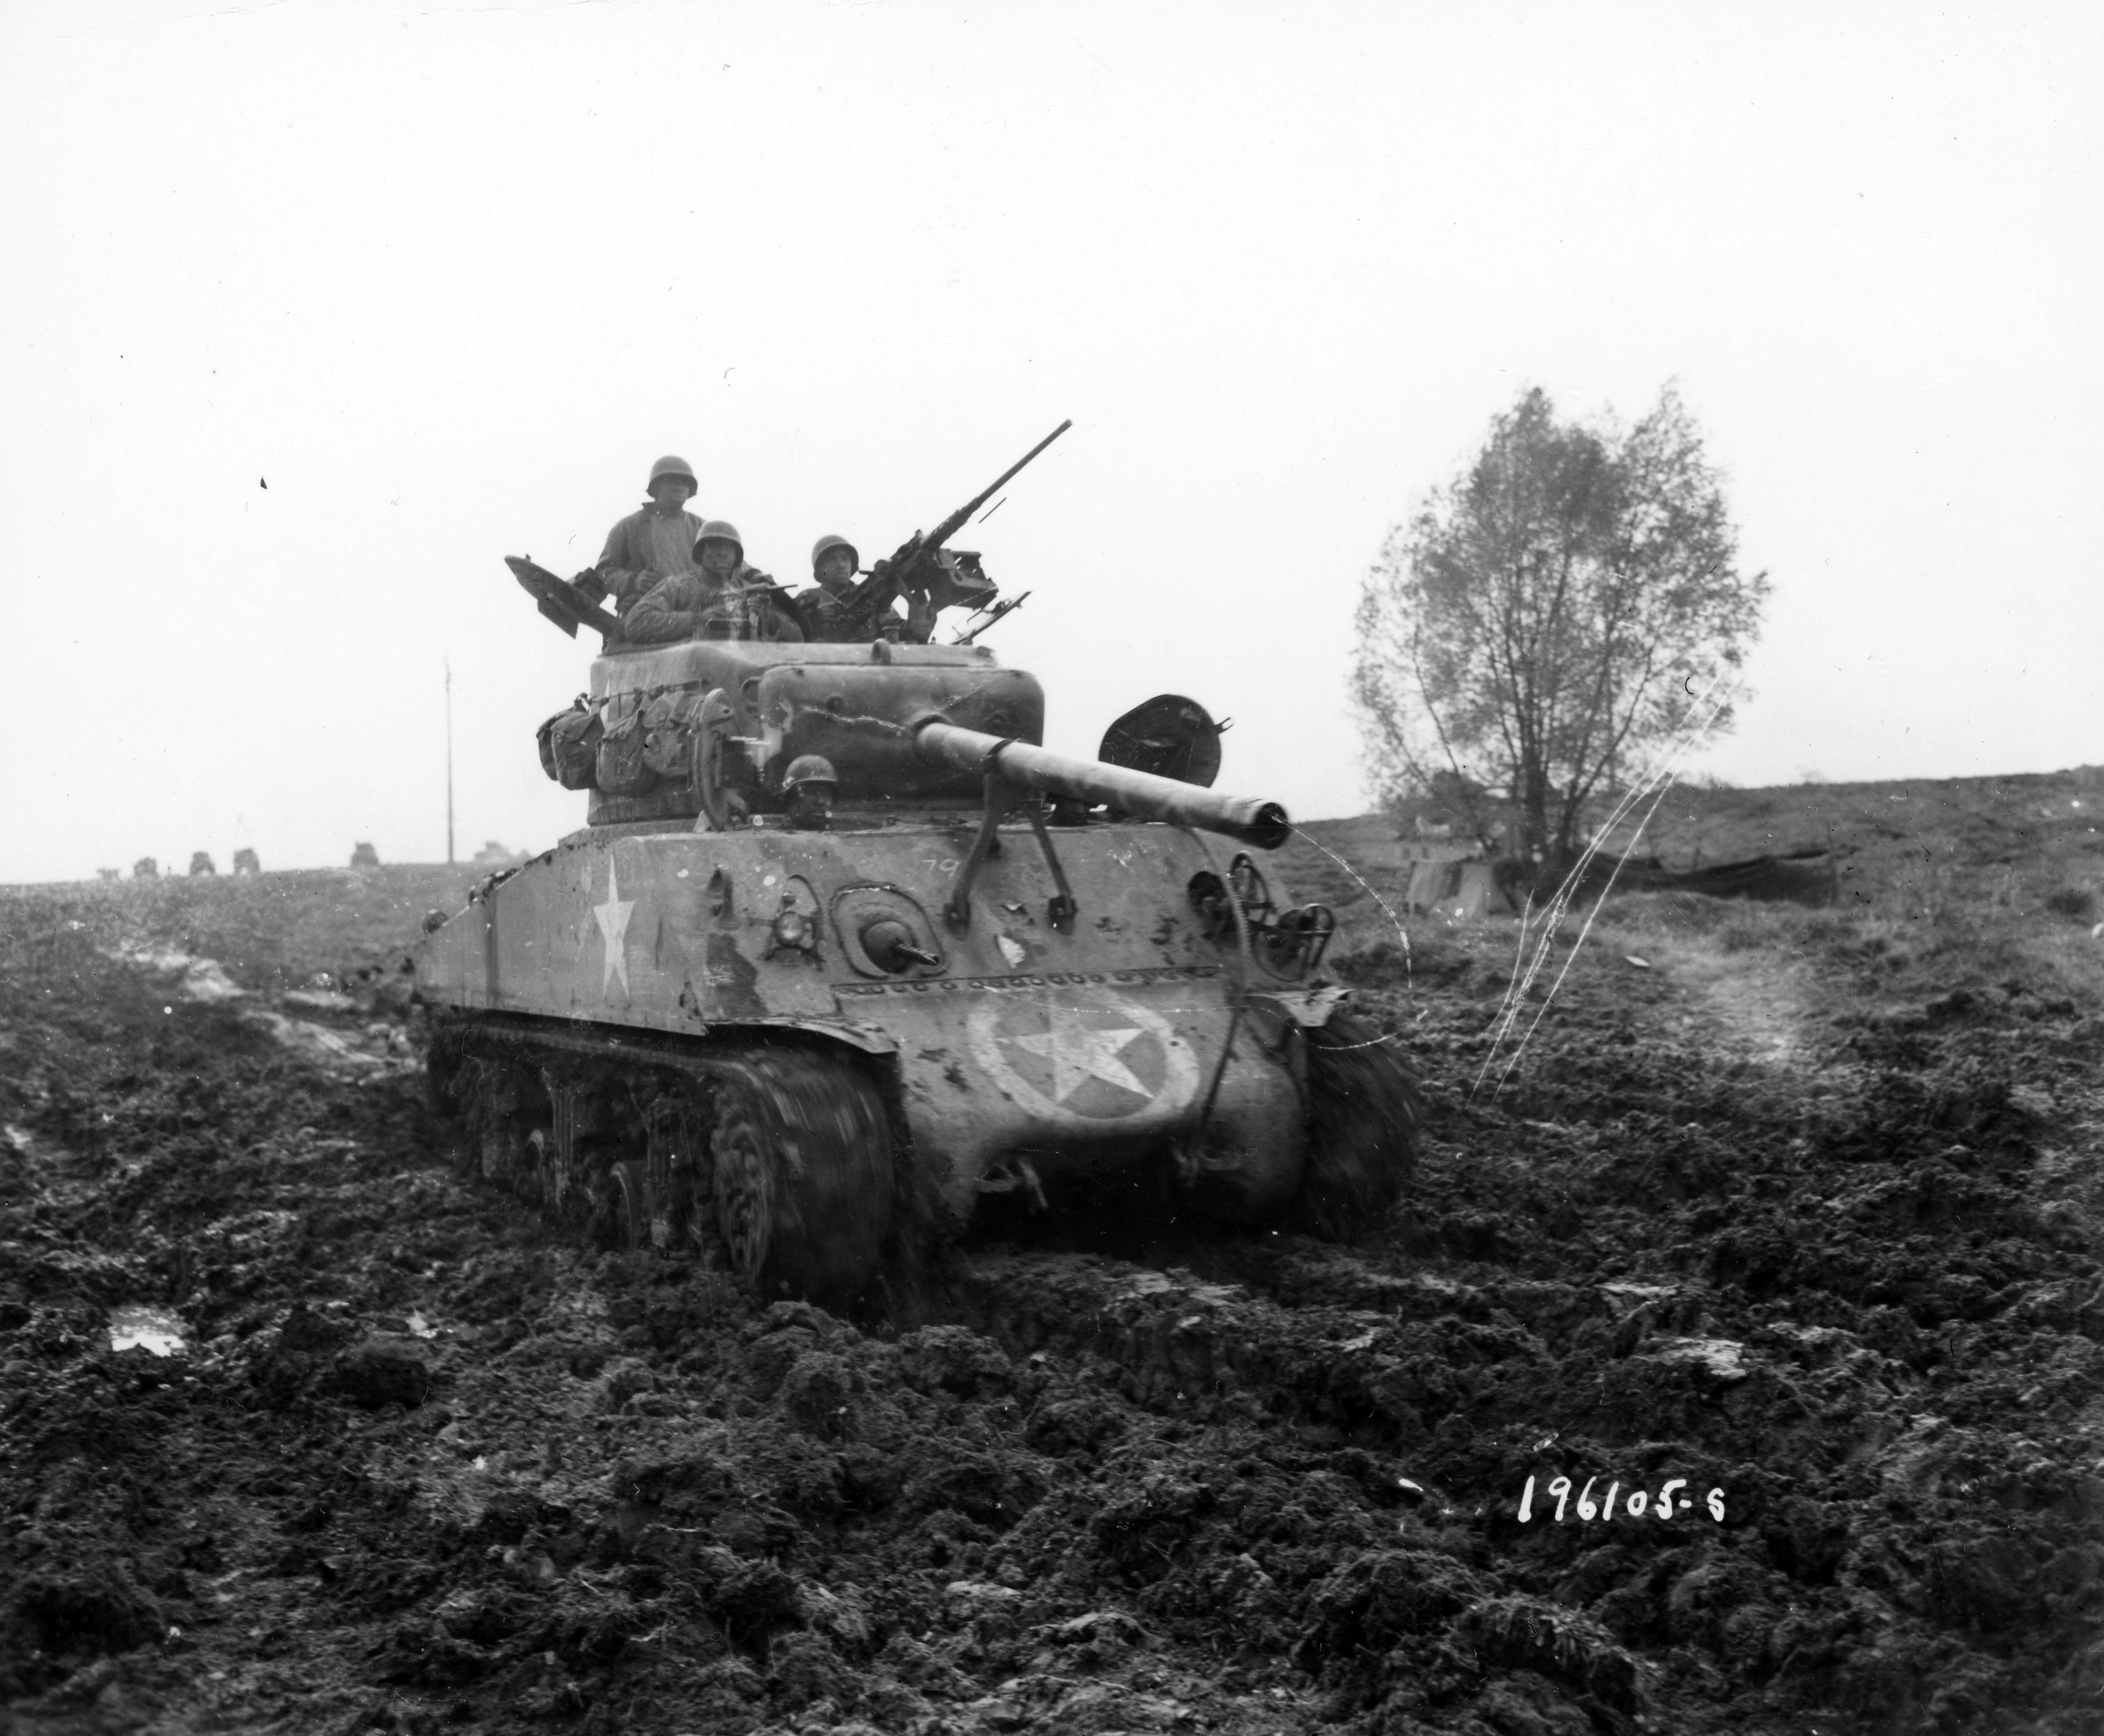 An image of A M4 Sherman tank of the 761st Tank Battalion